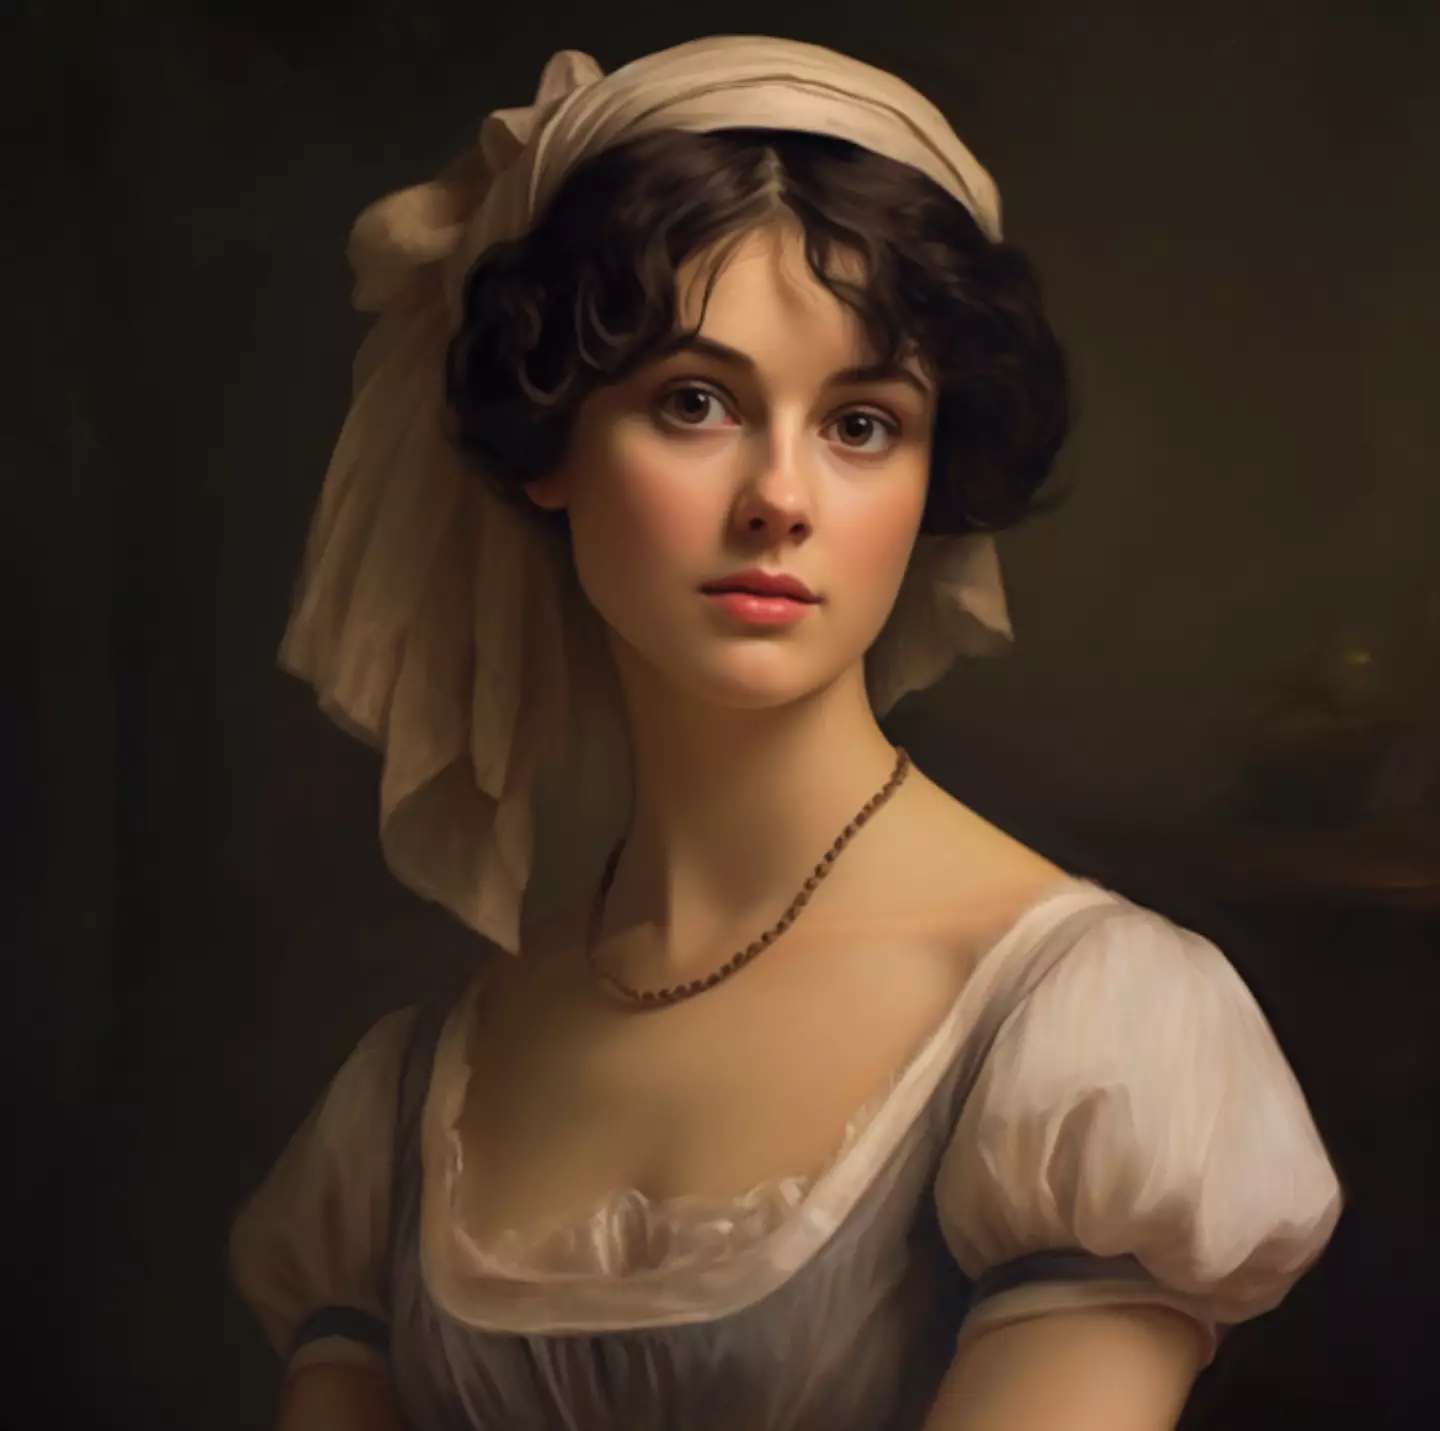 Jane Austen could be the model for the Mona Lisa.